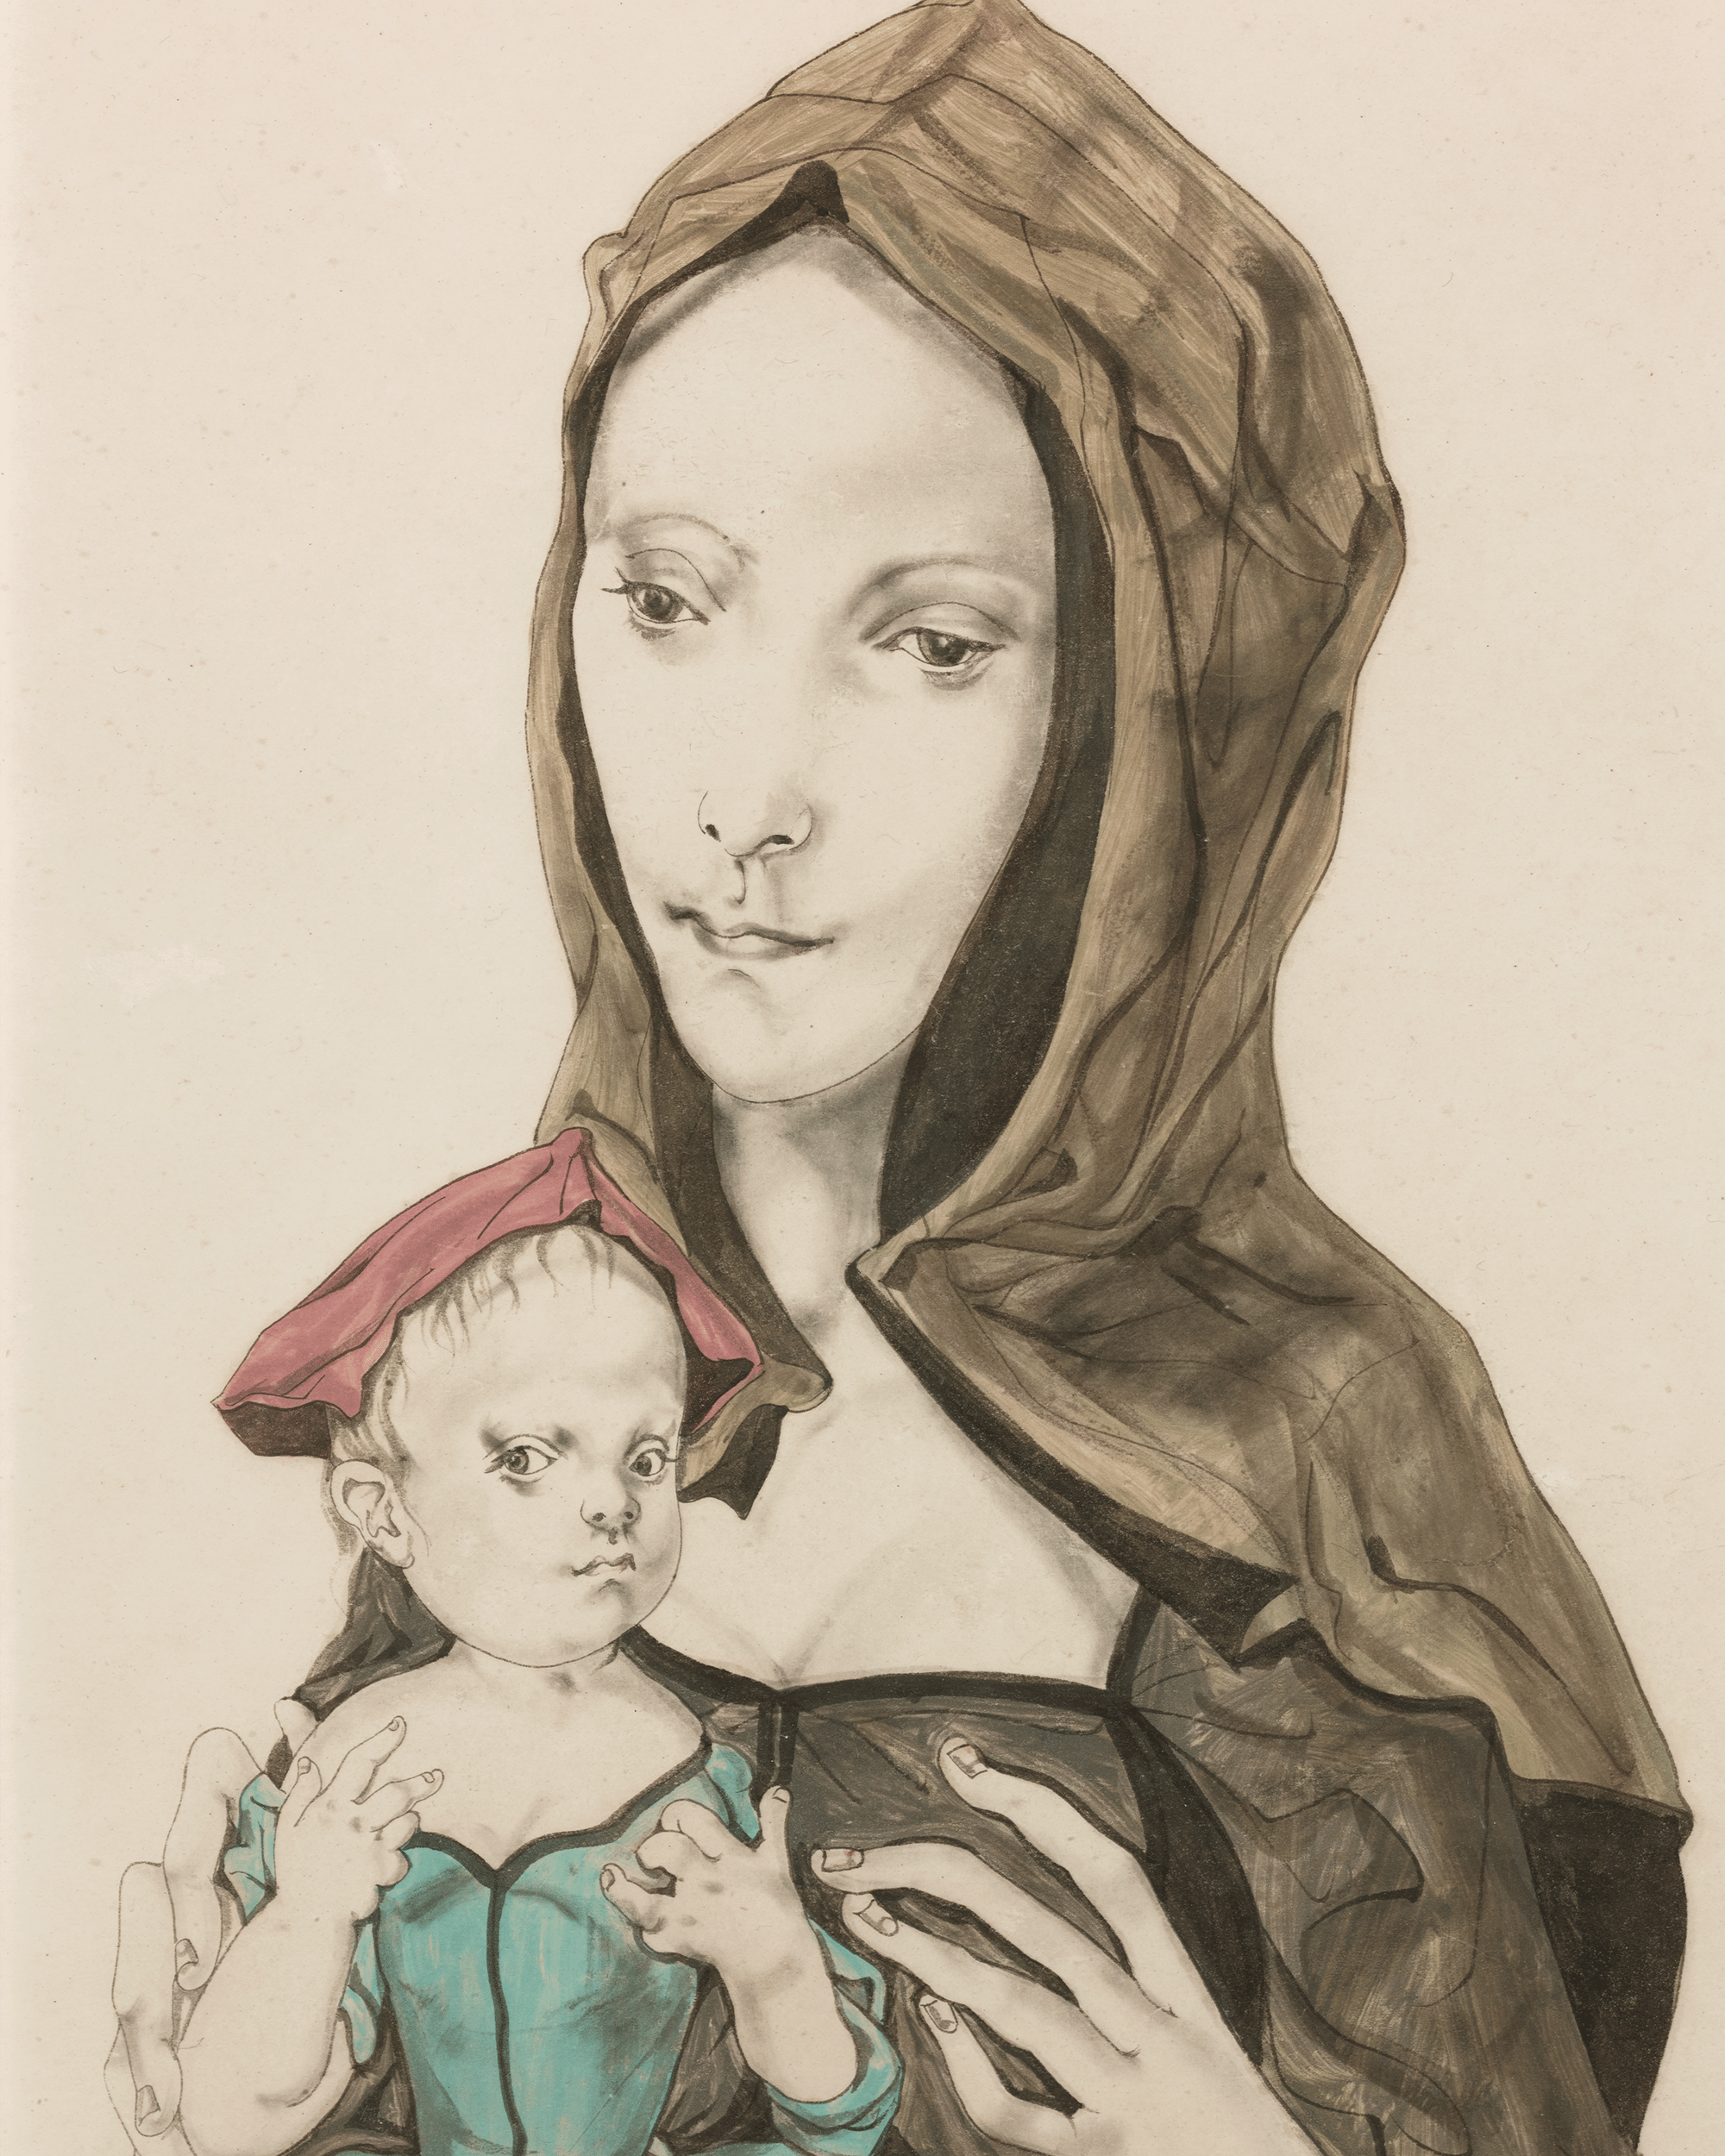 Portrait of a Mother and Child by Tsuguharu Foujita